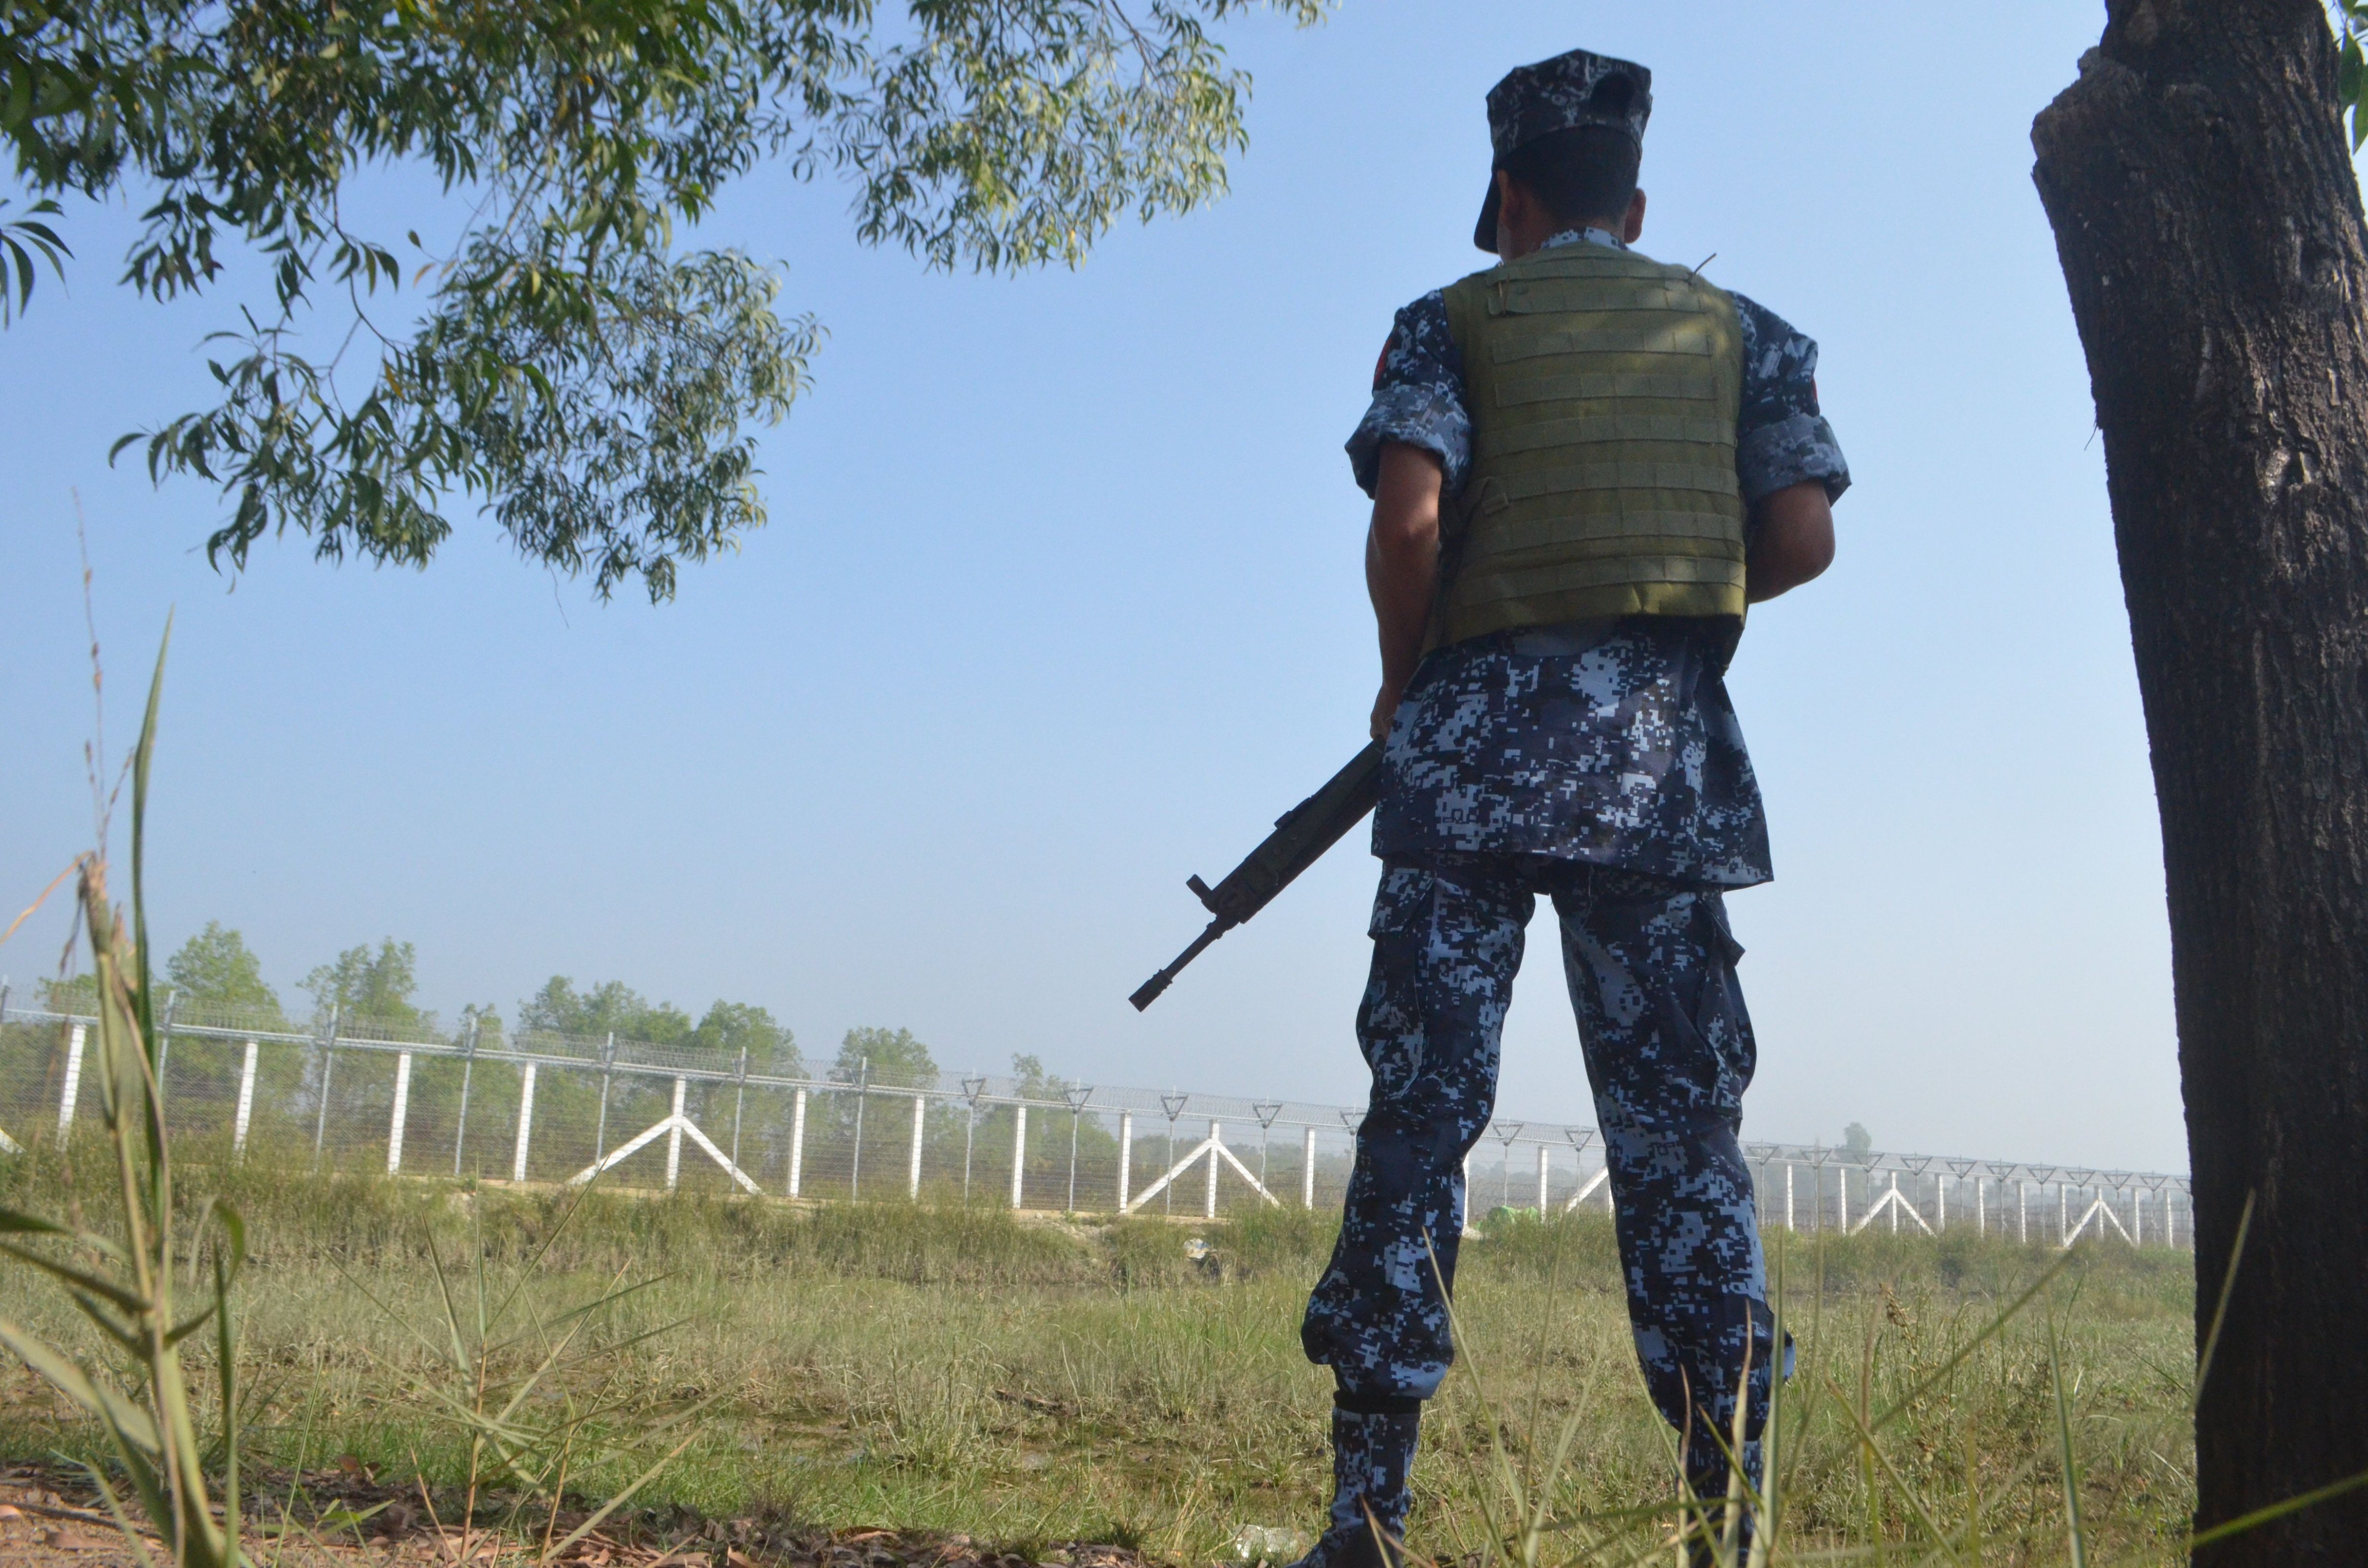 A Myanmar border policeman holds his weapon as he stands near the Taungpyo Bangladesh-Myanmar border gate on the outskirts of Maungdaw in Rakhine state on Jan. 24, 2018. (AFP/Getty Images)